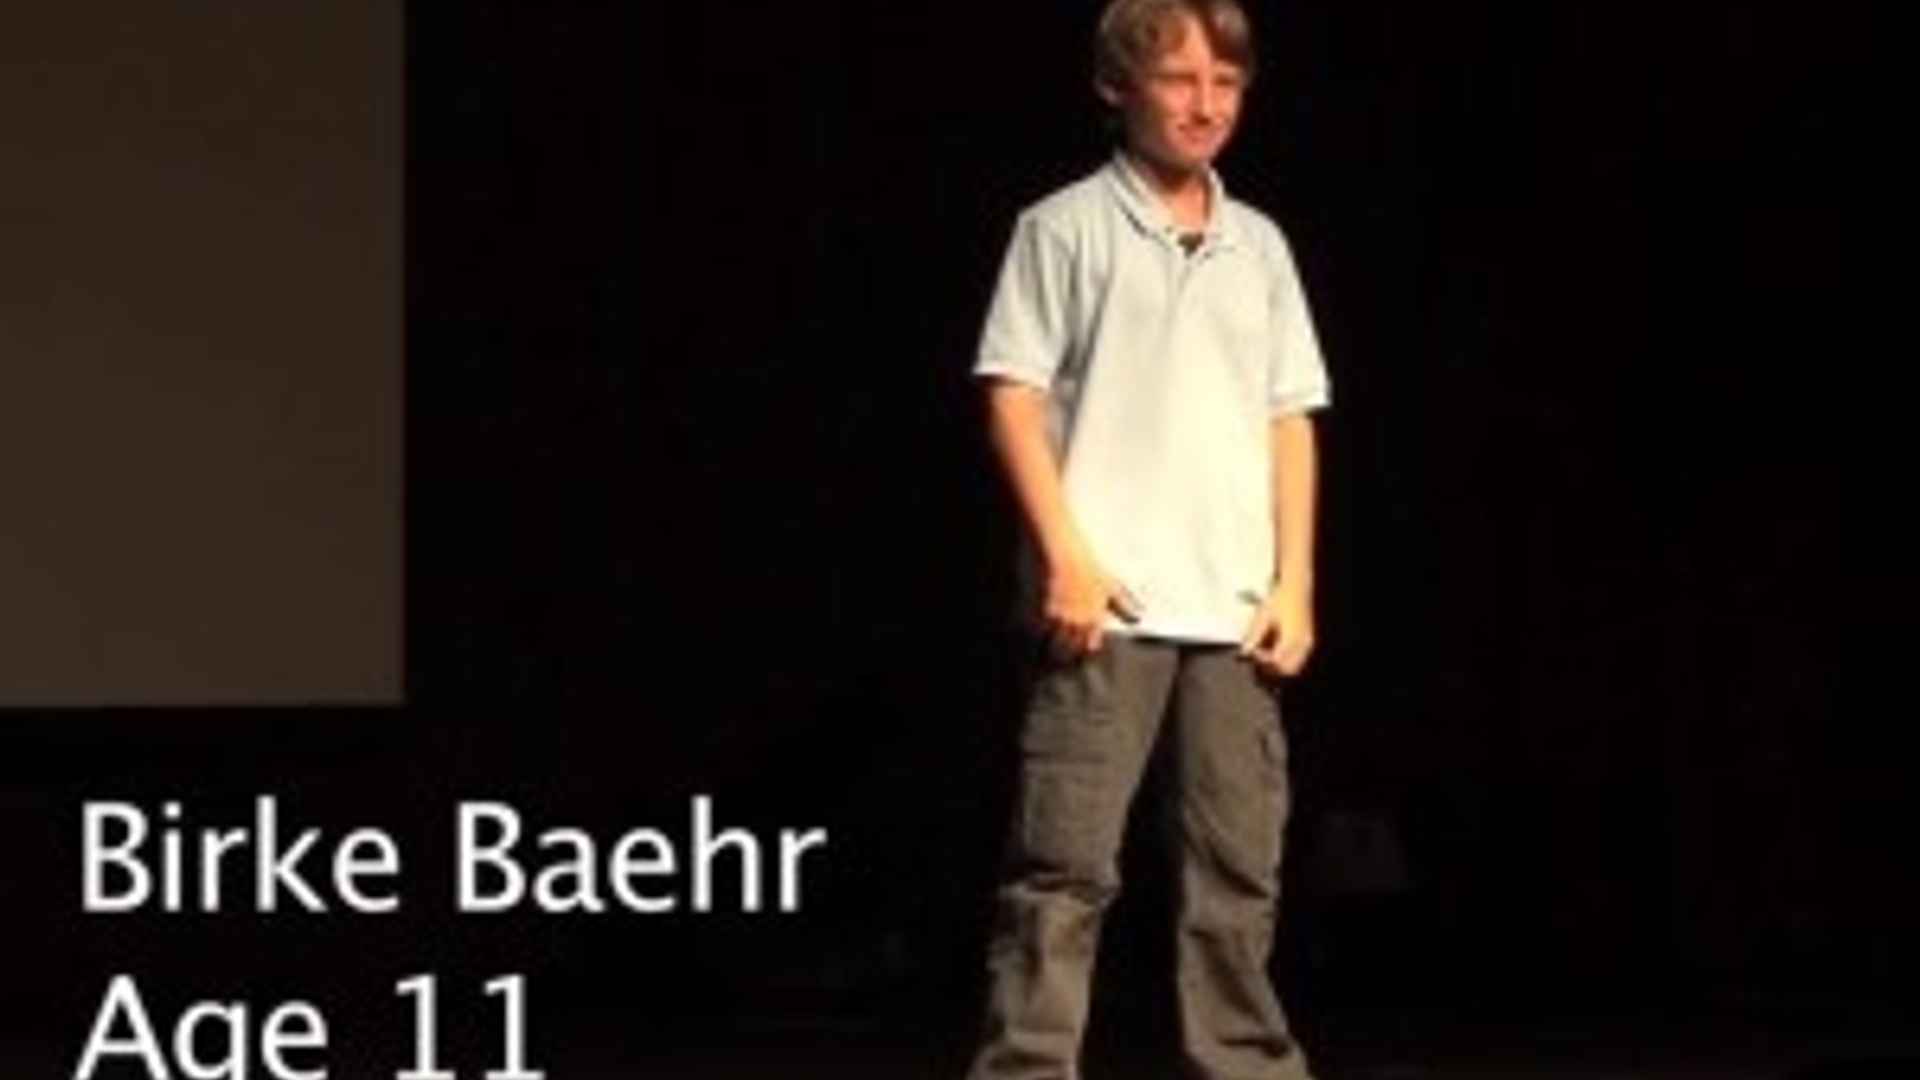 What_s_Wrong_With_Our_Food_System__Birke_Baehr_at_TEDxNextGenerationAsheville_-_YouTube.jpg